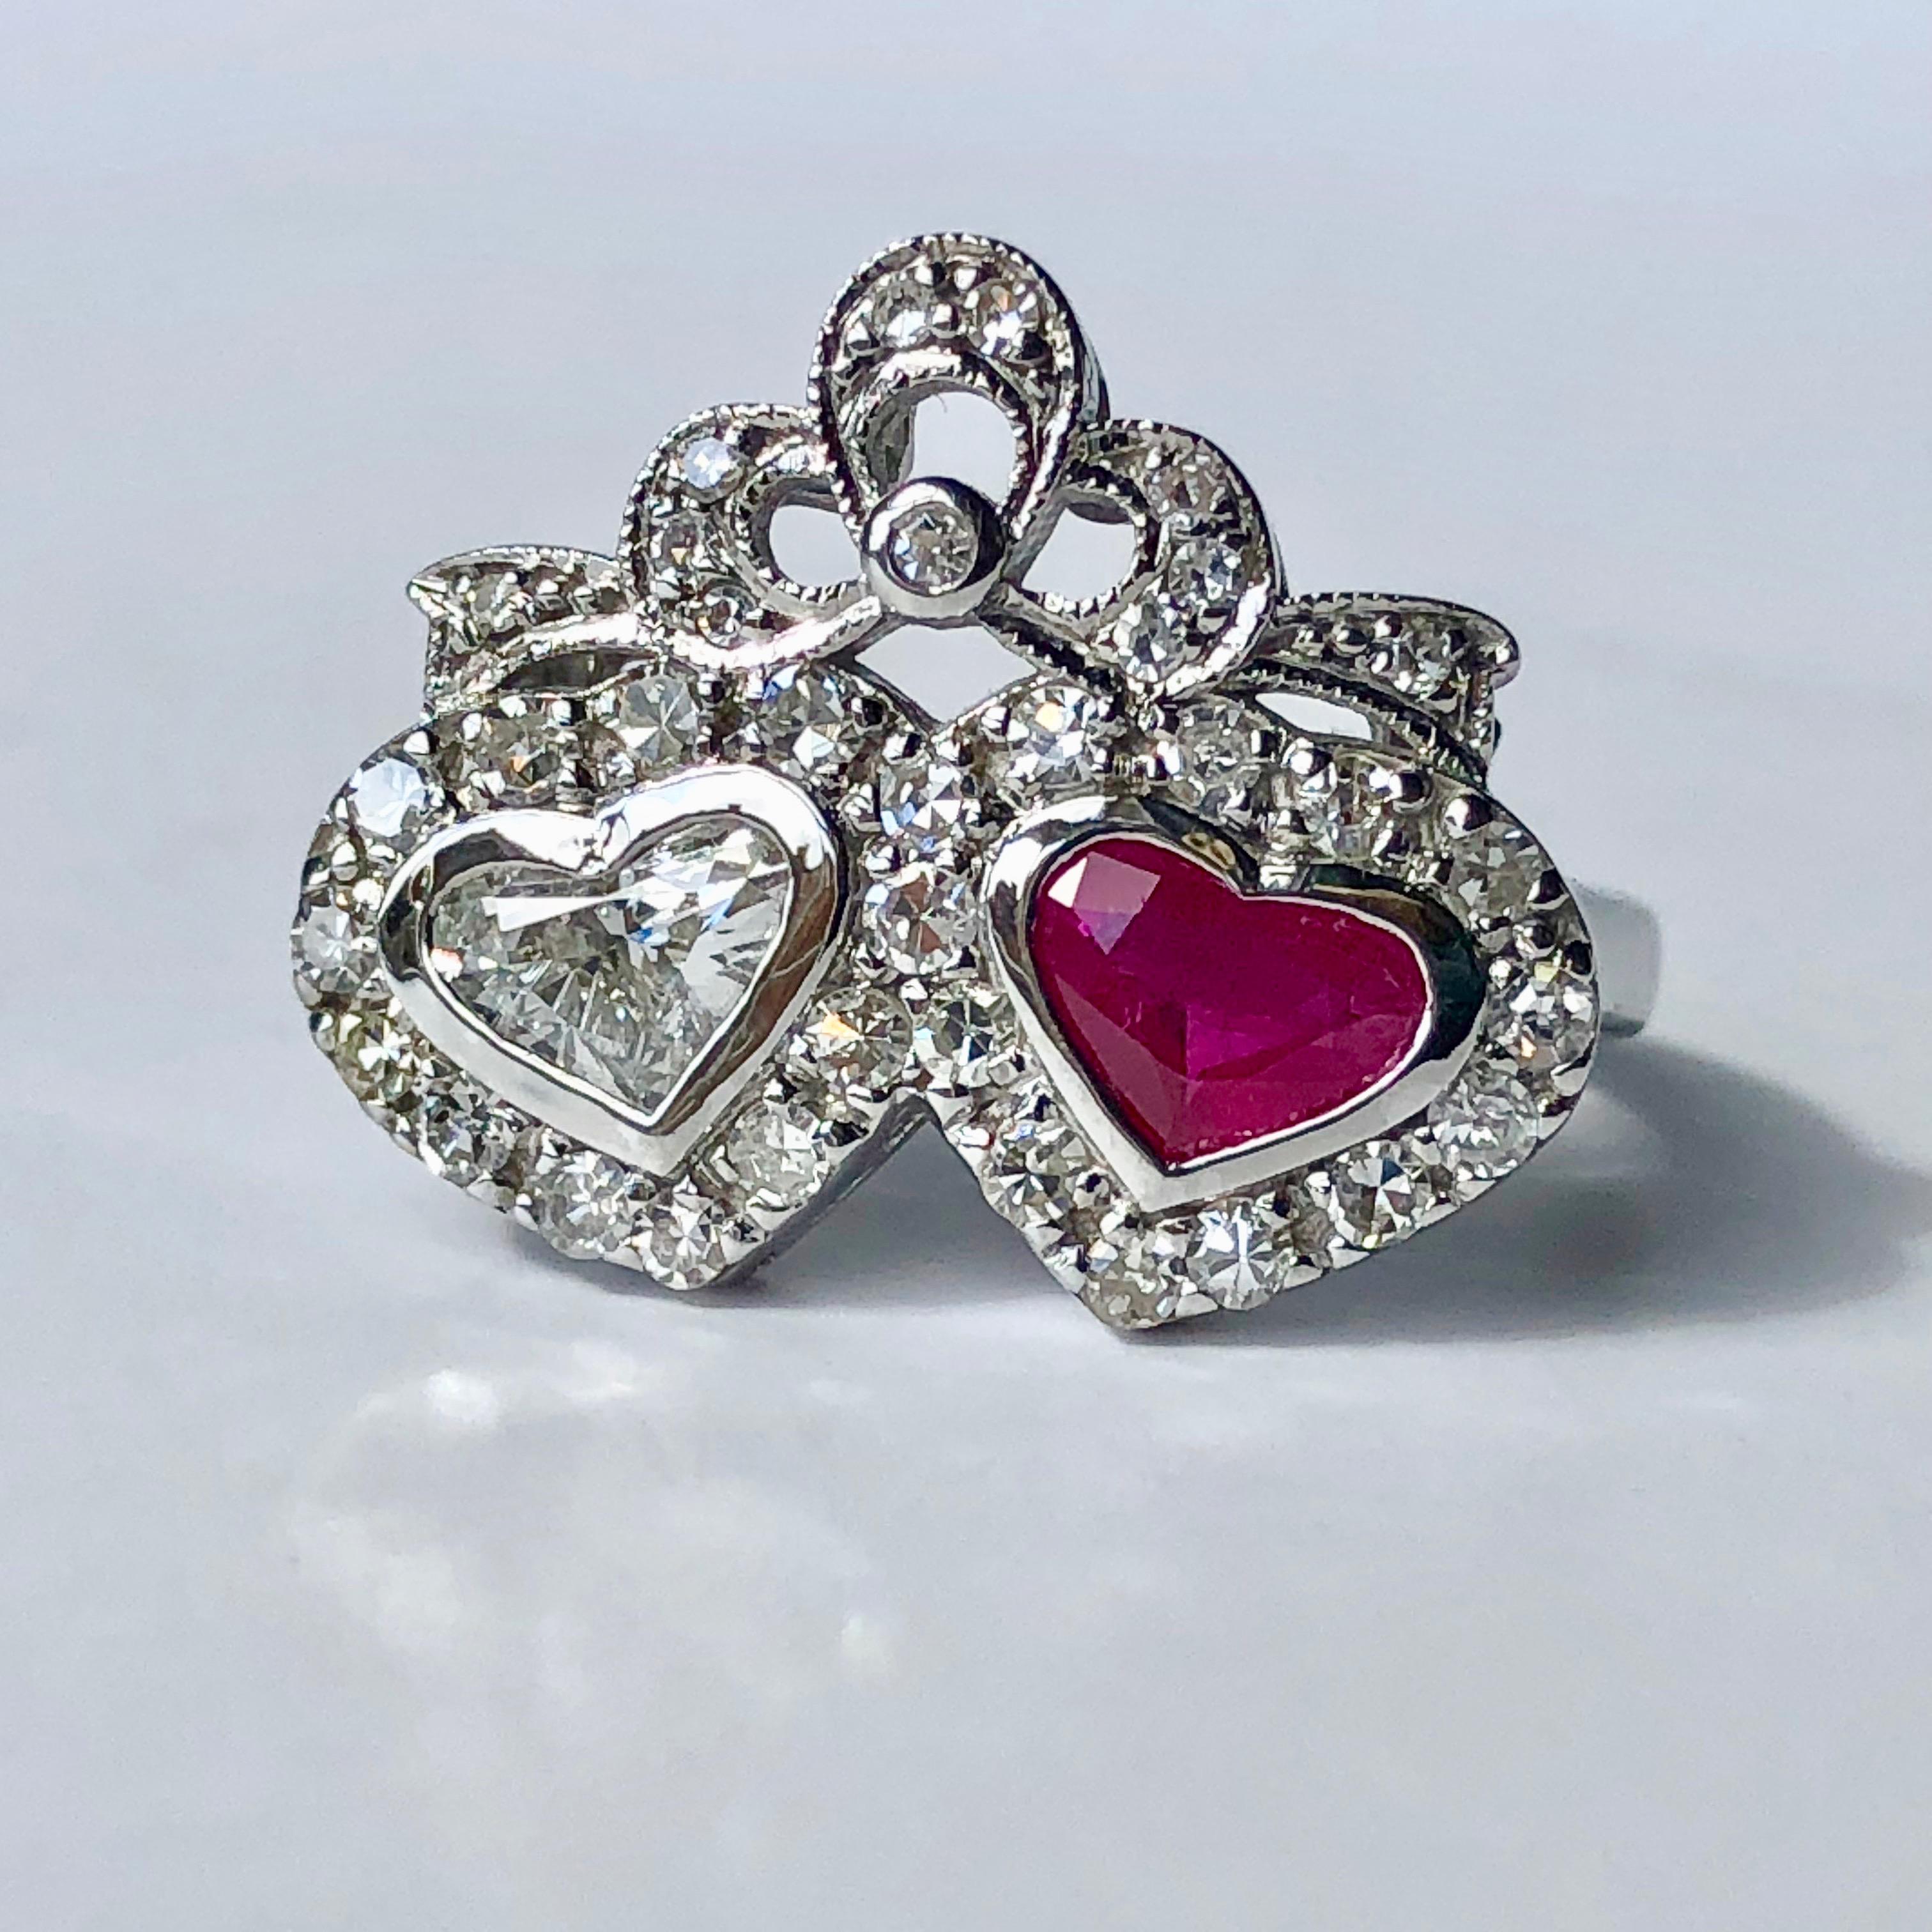 A Beautiful Twin Hearts Ring, Love Entwined. Possibly Irish.

Total Diamond Weight .80ct Est

Set with one heart shaped Ruby and one heart shaped Diamond with a diamond surround and diamond set bow detail

An ideal gift for an anniversary, for